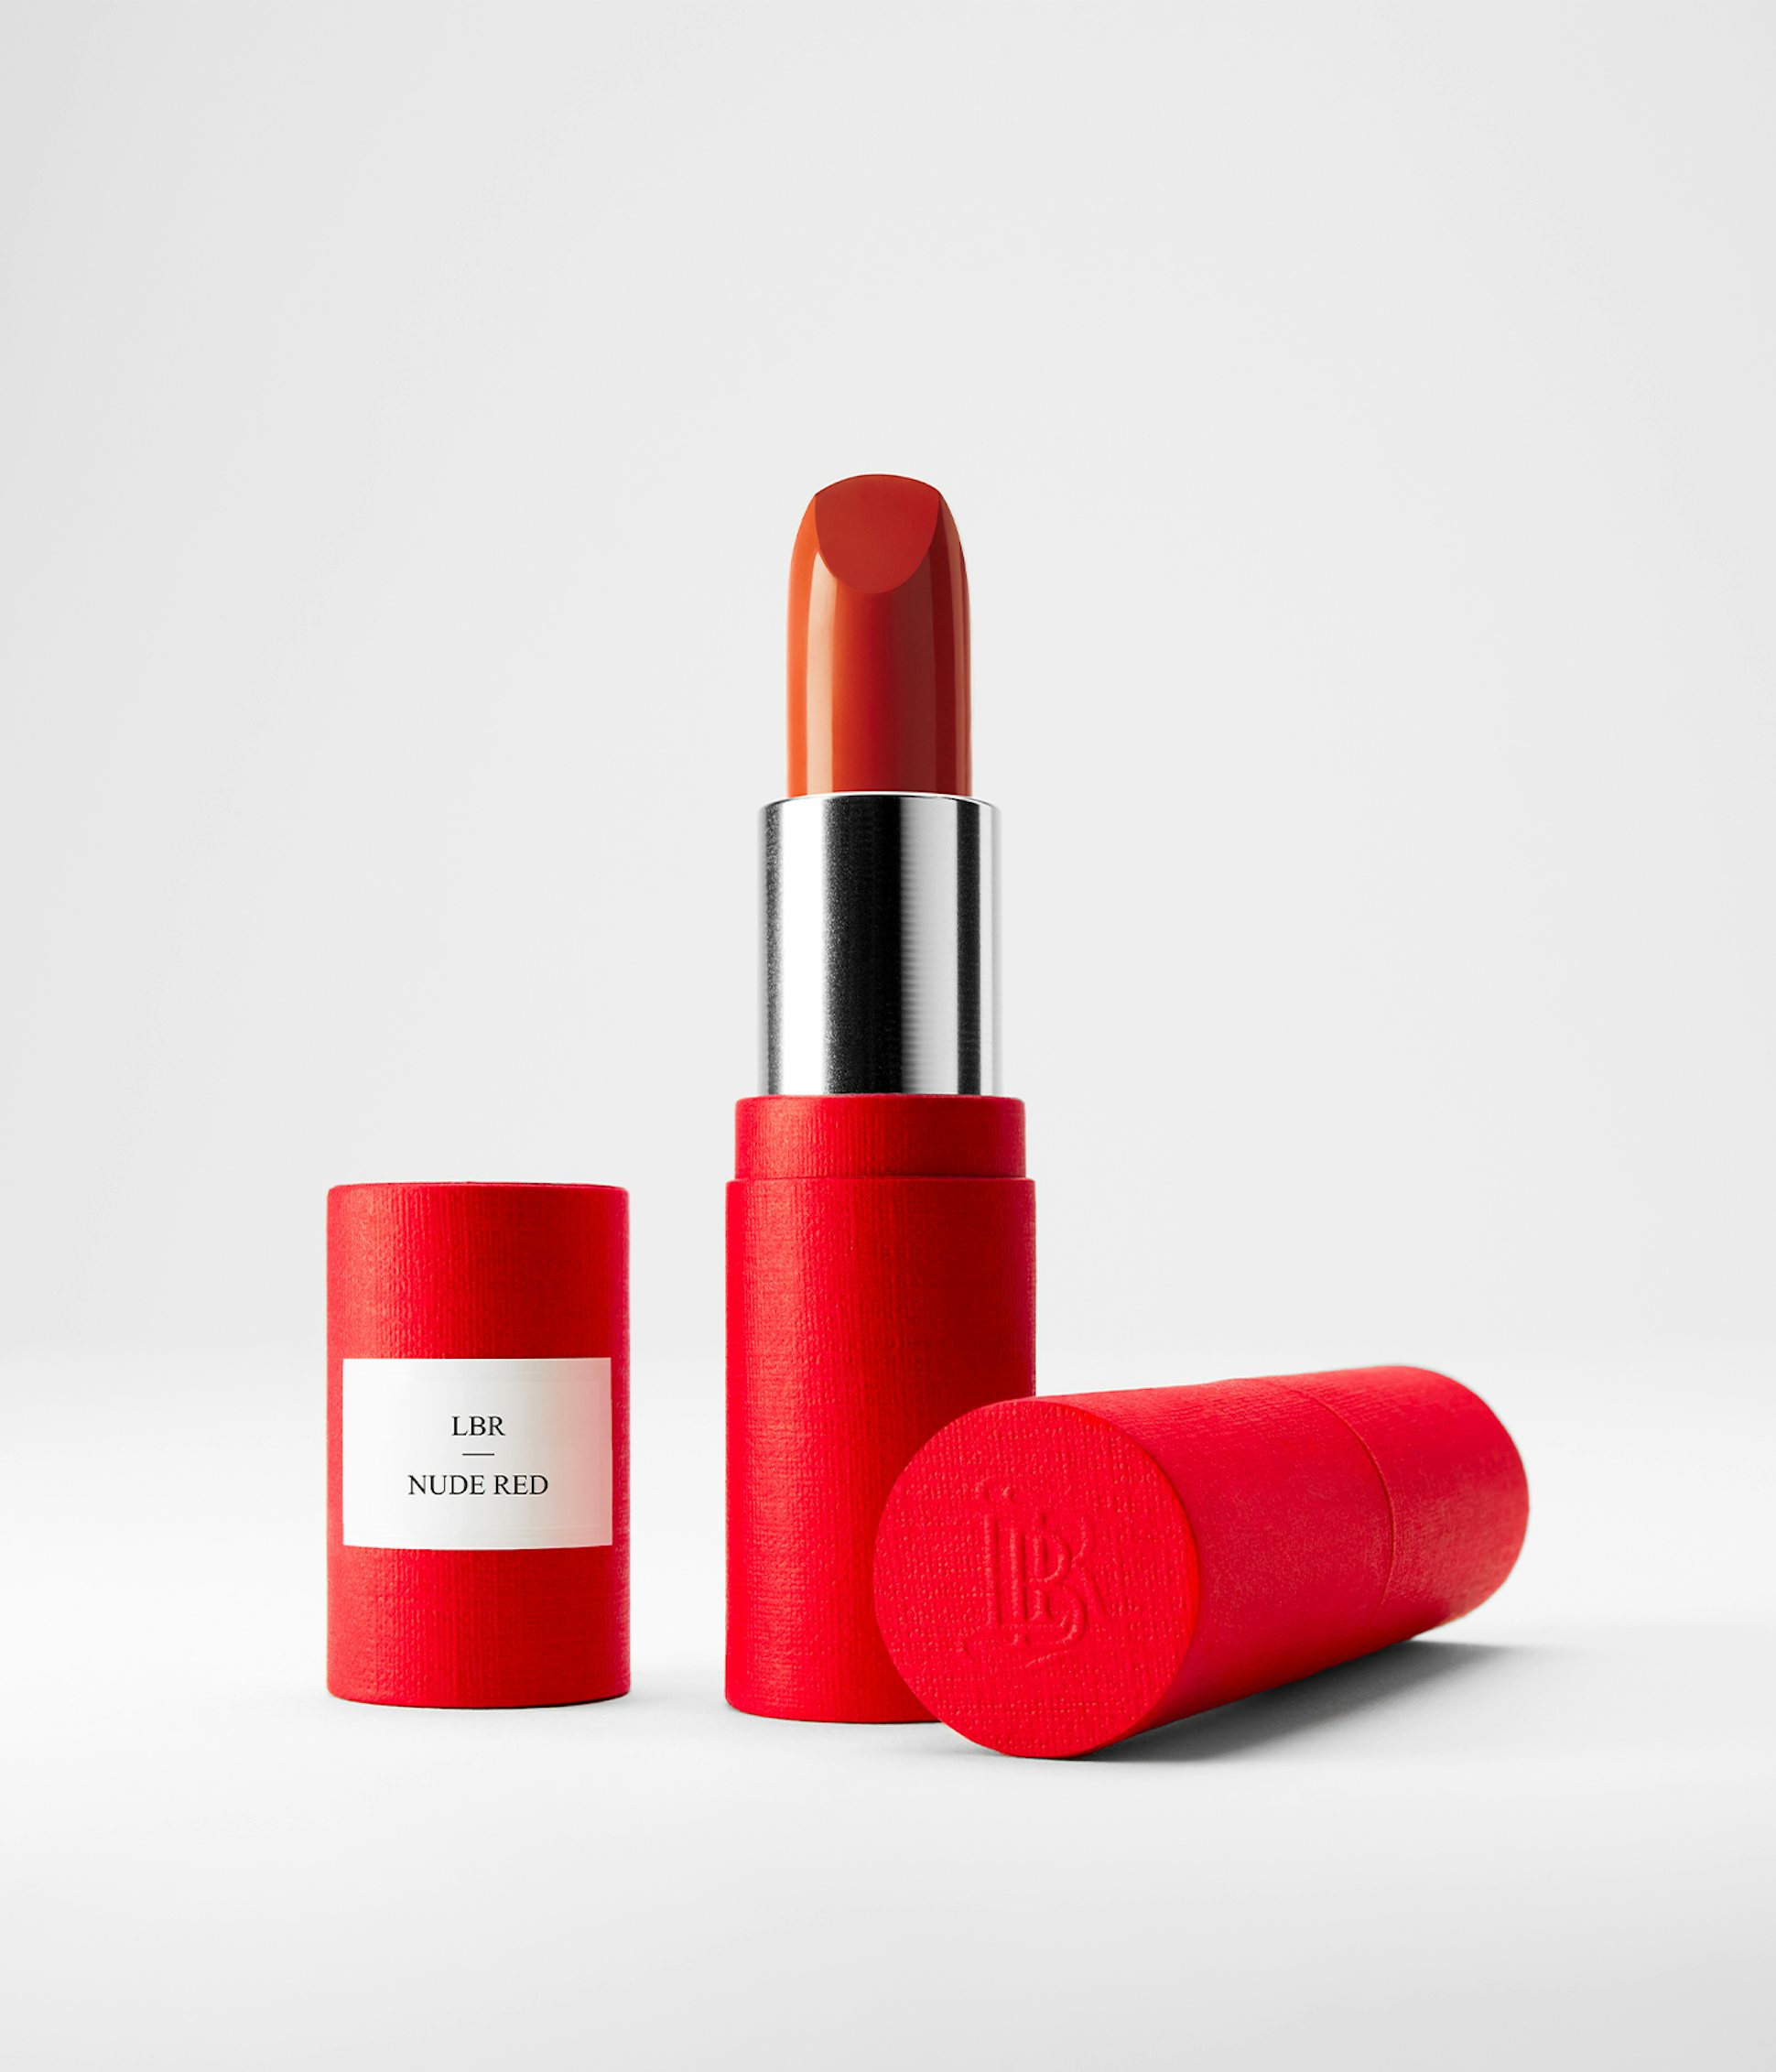 La bouche rouge Nude Red in it's red paper case